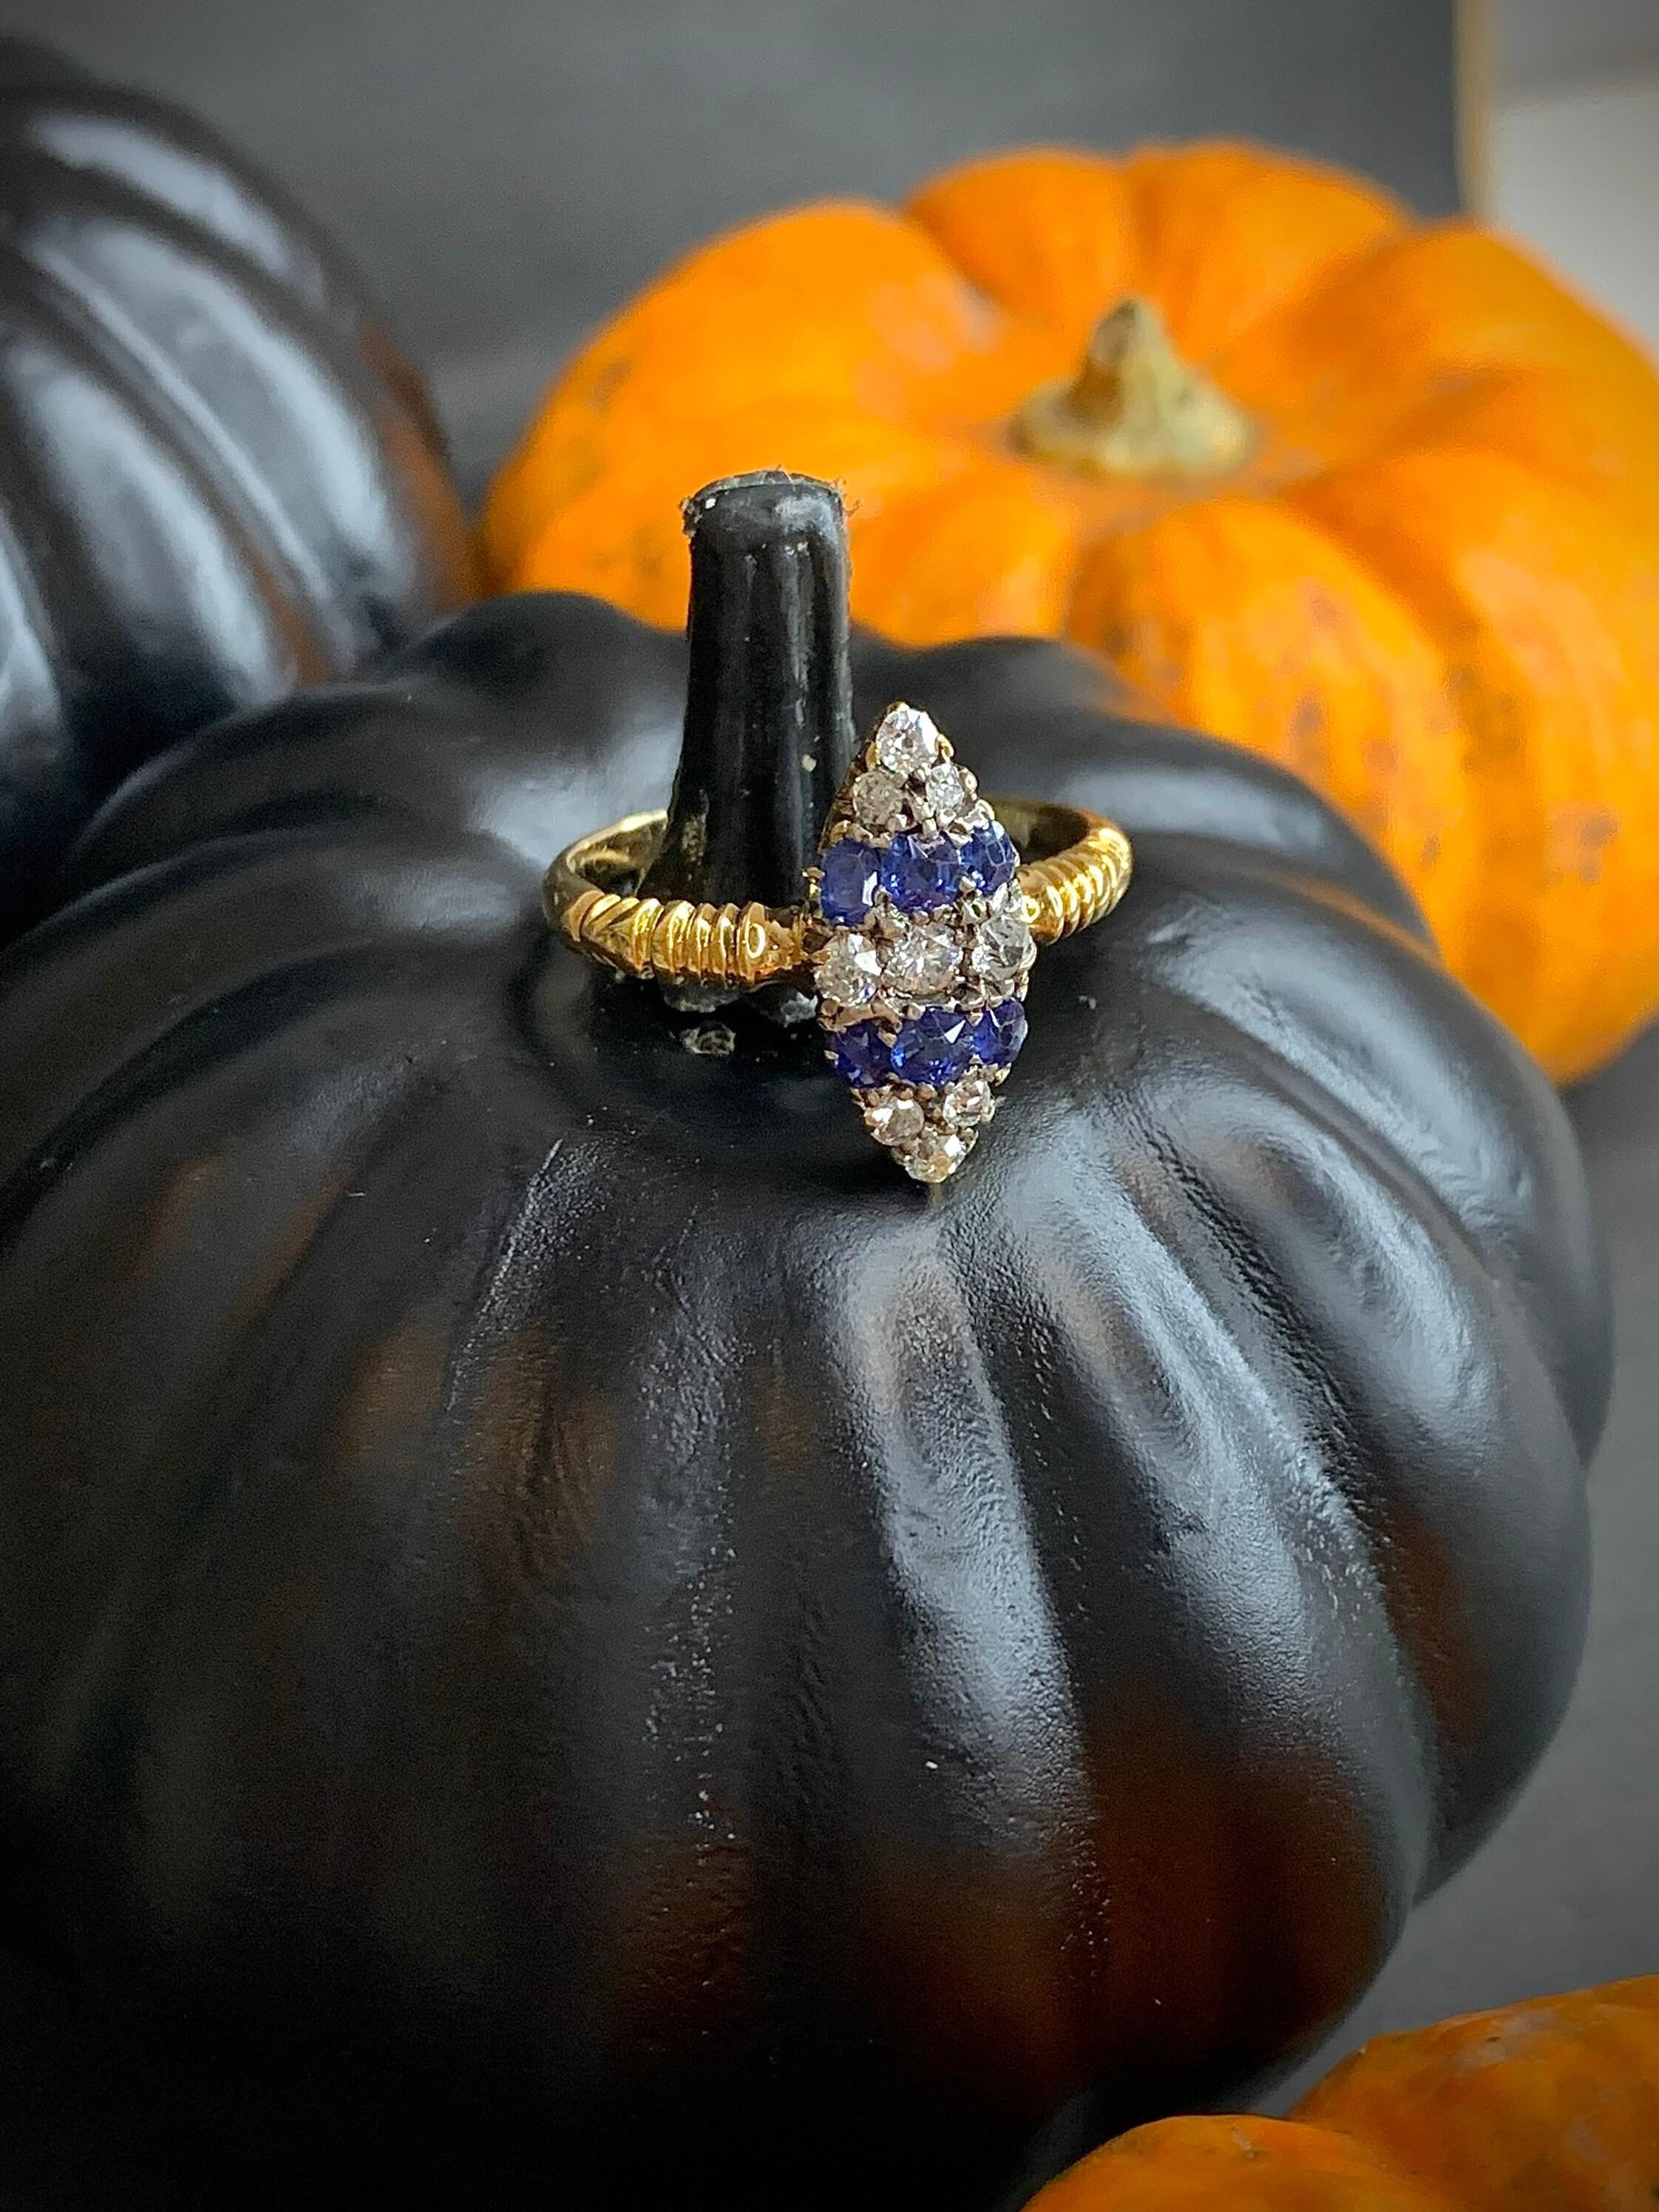 Antique Sapphire & Diamond Marquise Ring 

18ct Gold 

Victorian Circa 1880

Fabulous Marquise/Navette Shaped Ring. Set with Rows of Stunning Sapphires & Diamonds. Finished Beautifully with a Reeded Band 

Face of the ring measures approx 17mm x